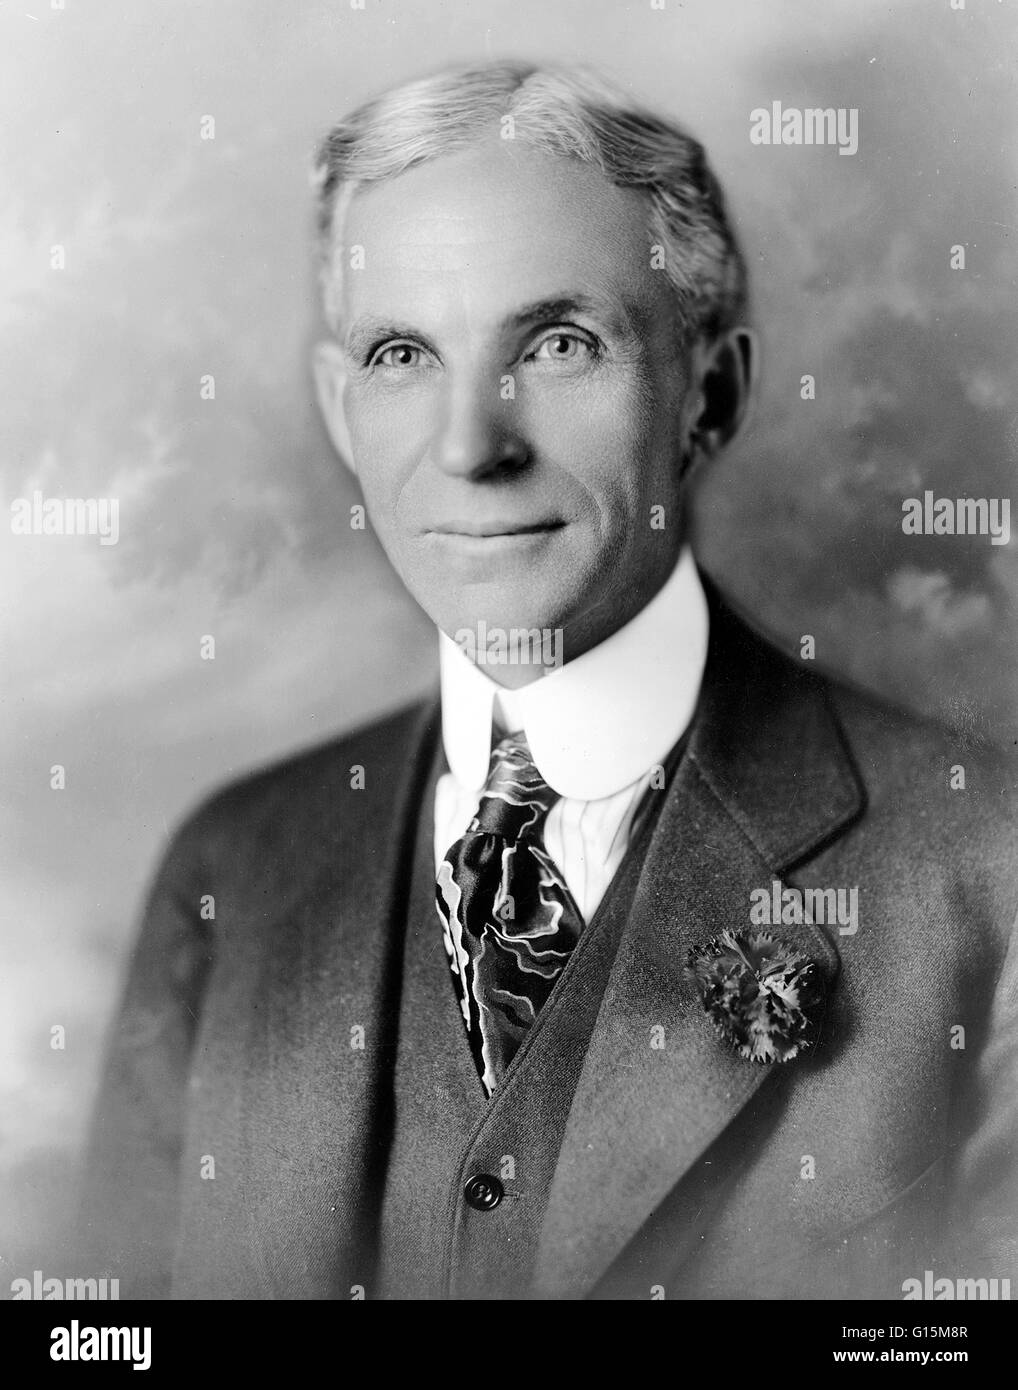 Henry Ford (July 30, 1863 - April 7, 1947) was an American industrialist, the founder of the Ford Motor Company, and sponsor of the development of the assembly line technique of mass production. His introduction of the Model T automobile revolutionized tr Stock Photo